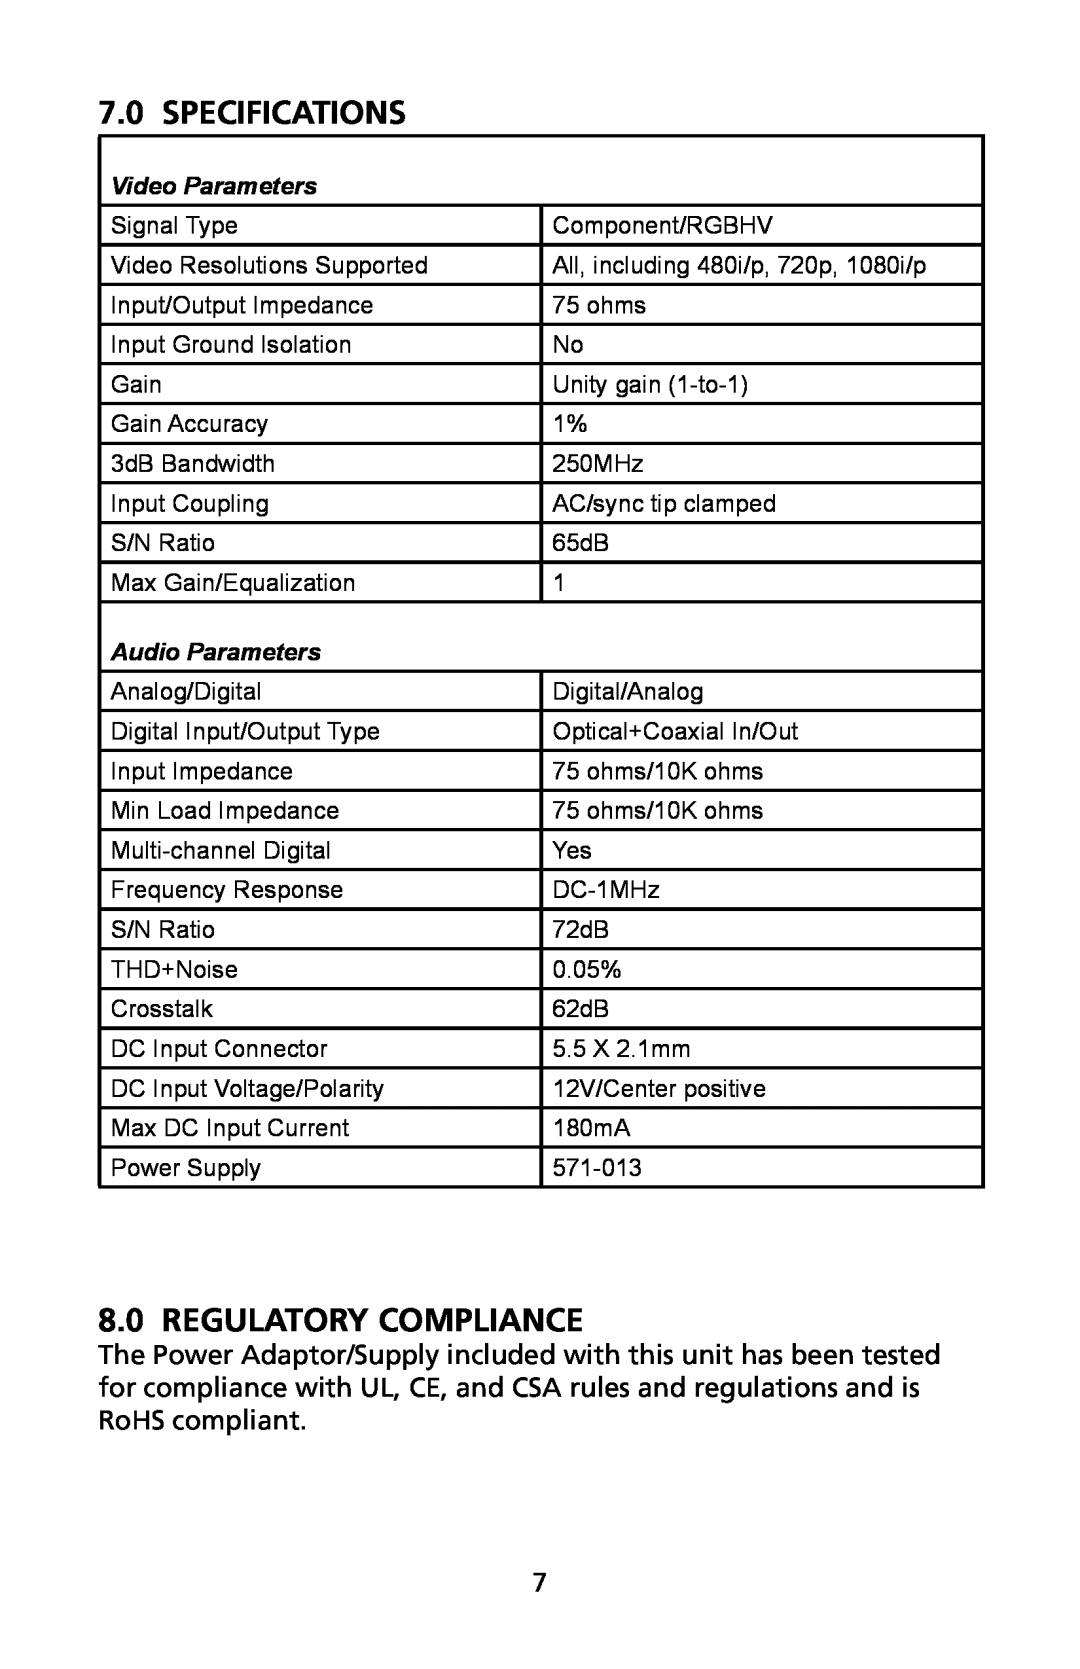 Audio Authority 1185ci user manual Specifications, Regulatory Compliance, Video Parameters, Audio Parameters 